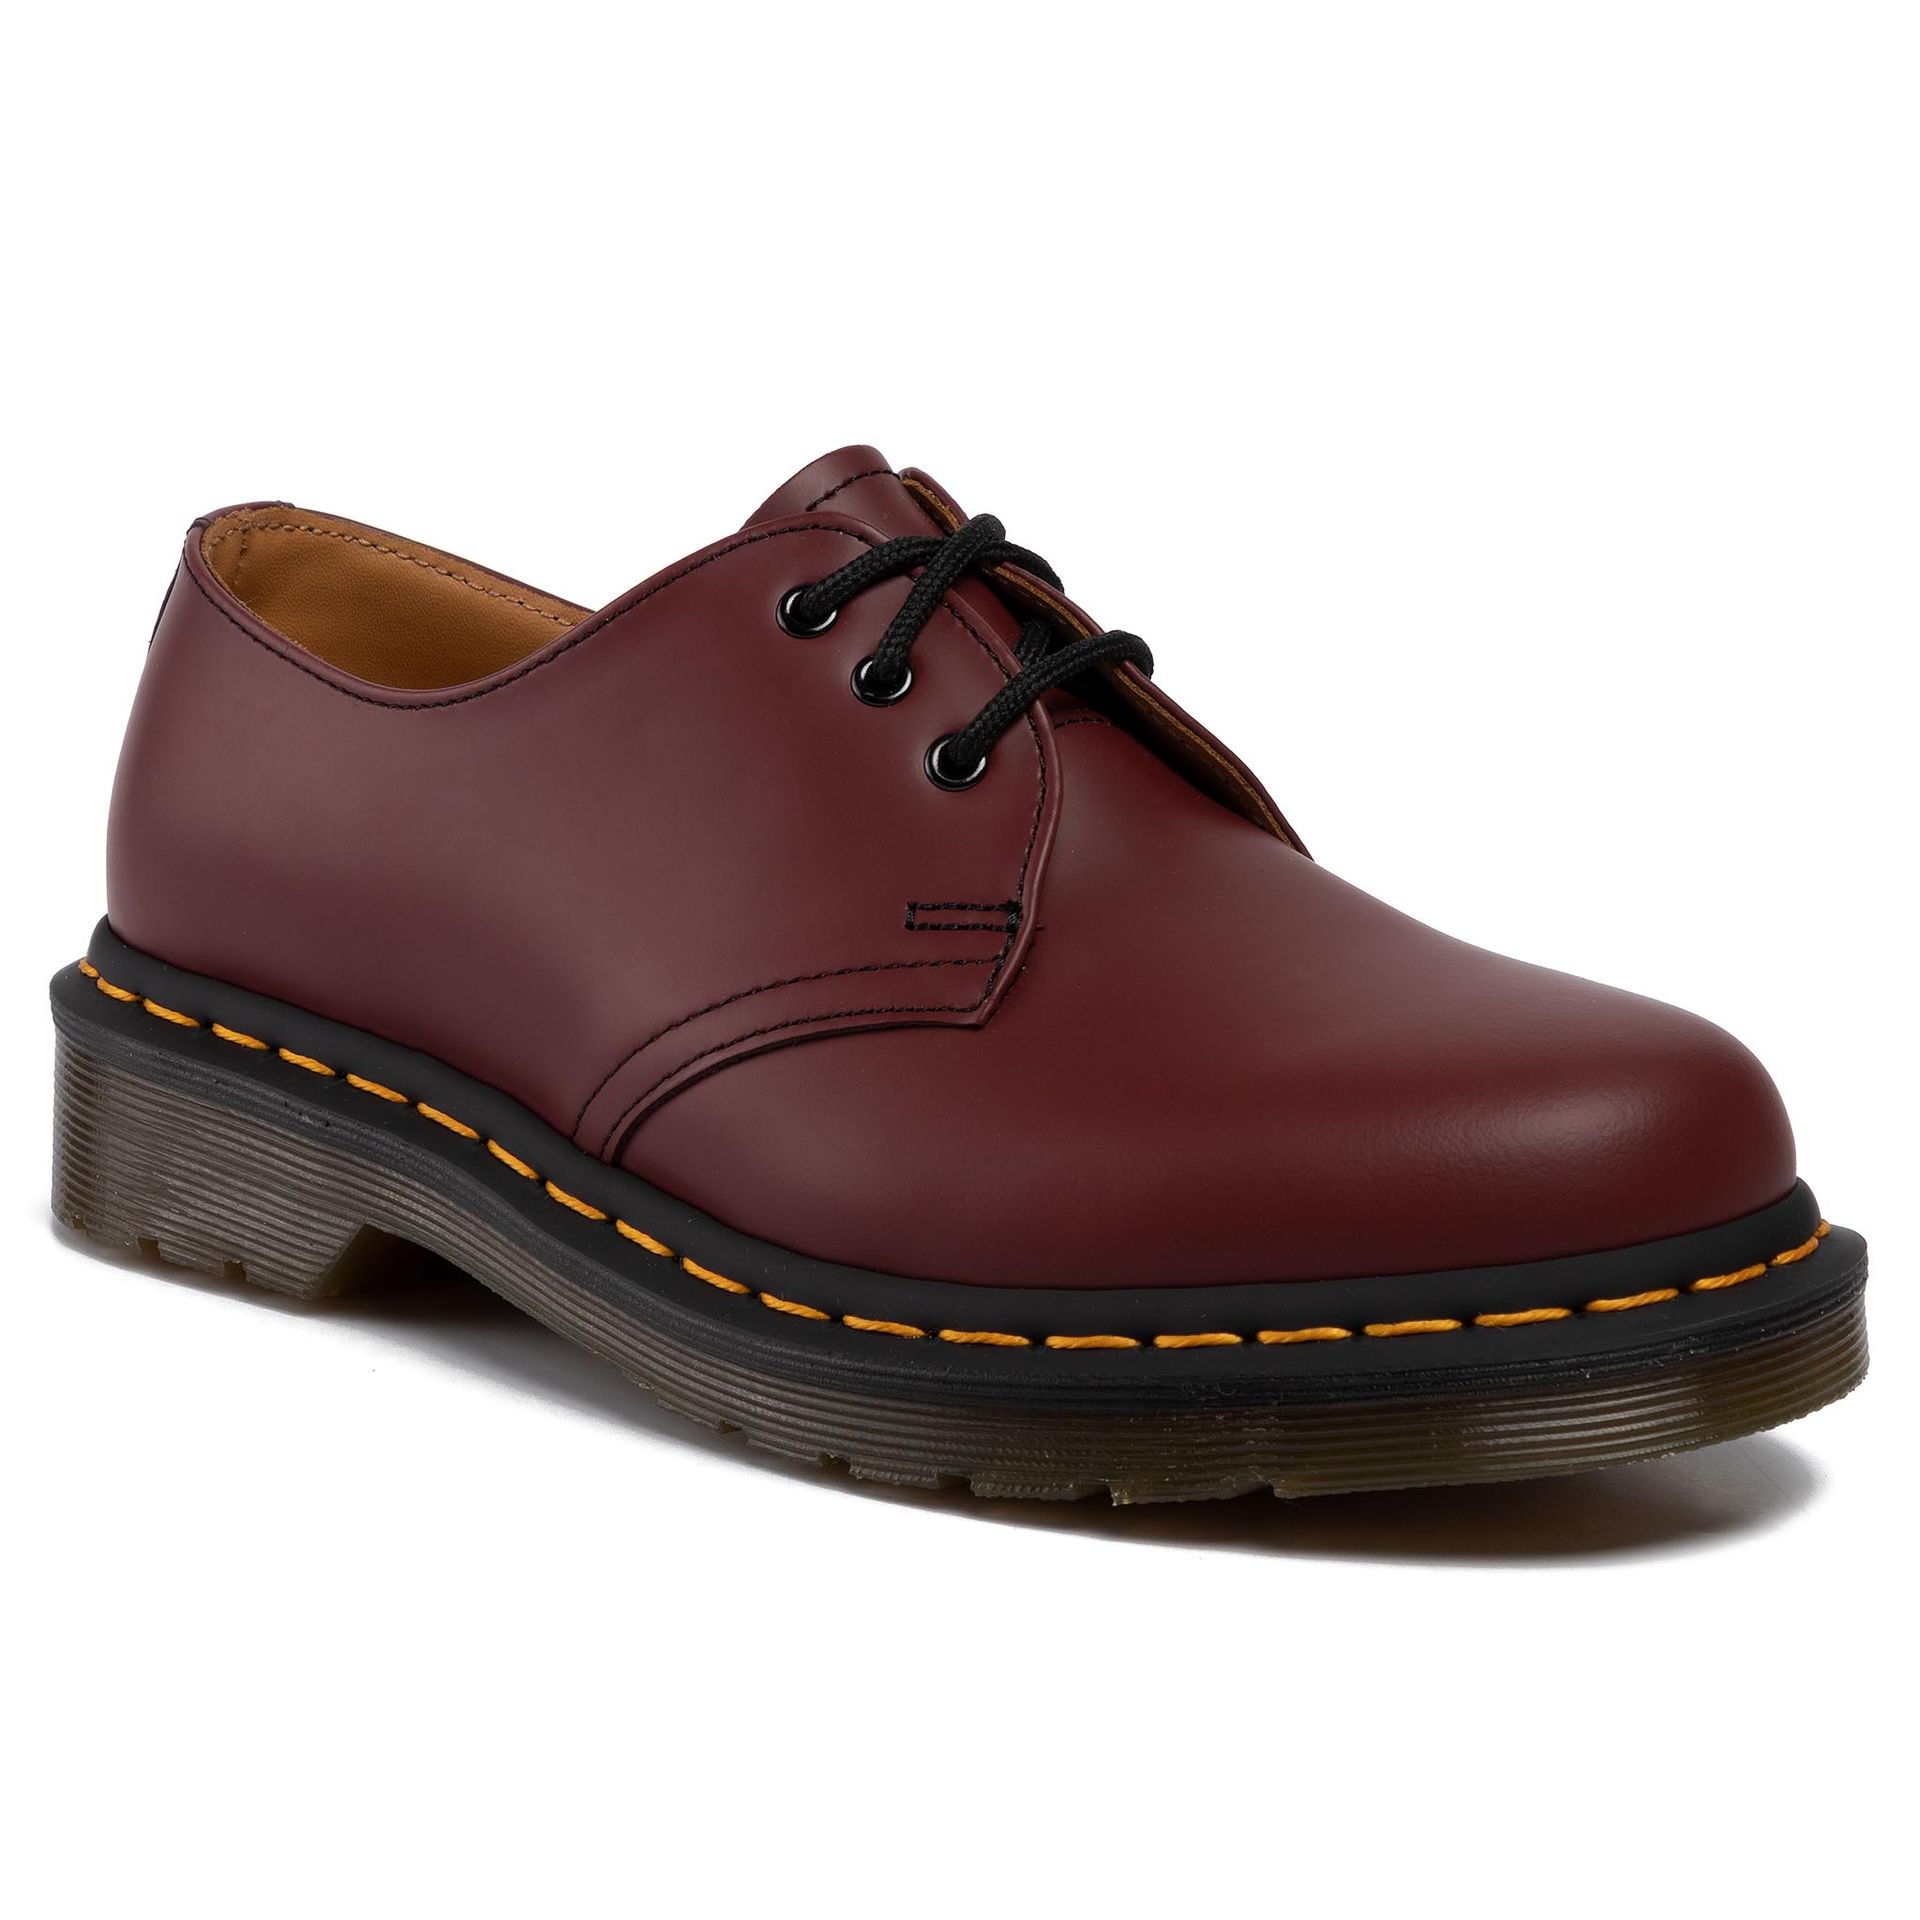 Dr. Martens Półbuty 1461 11838600 Cheery Red/Smooth